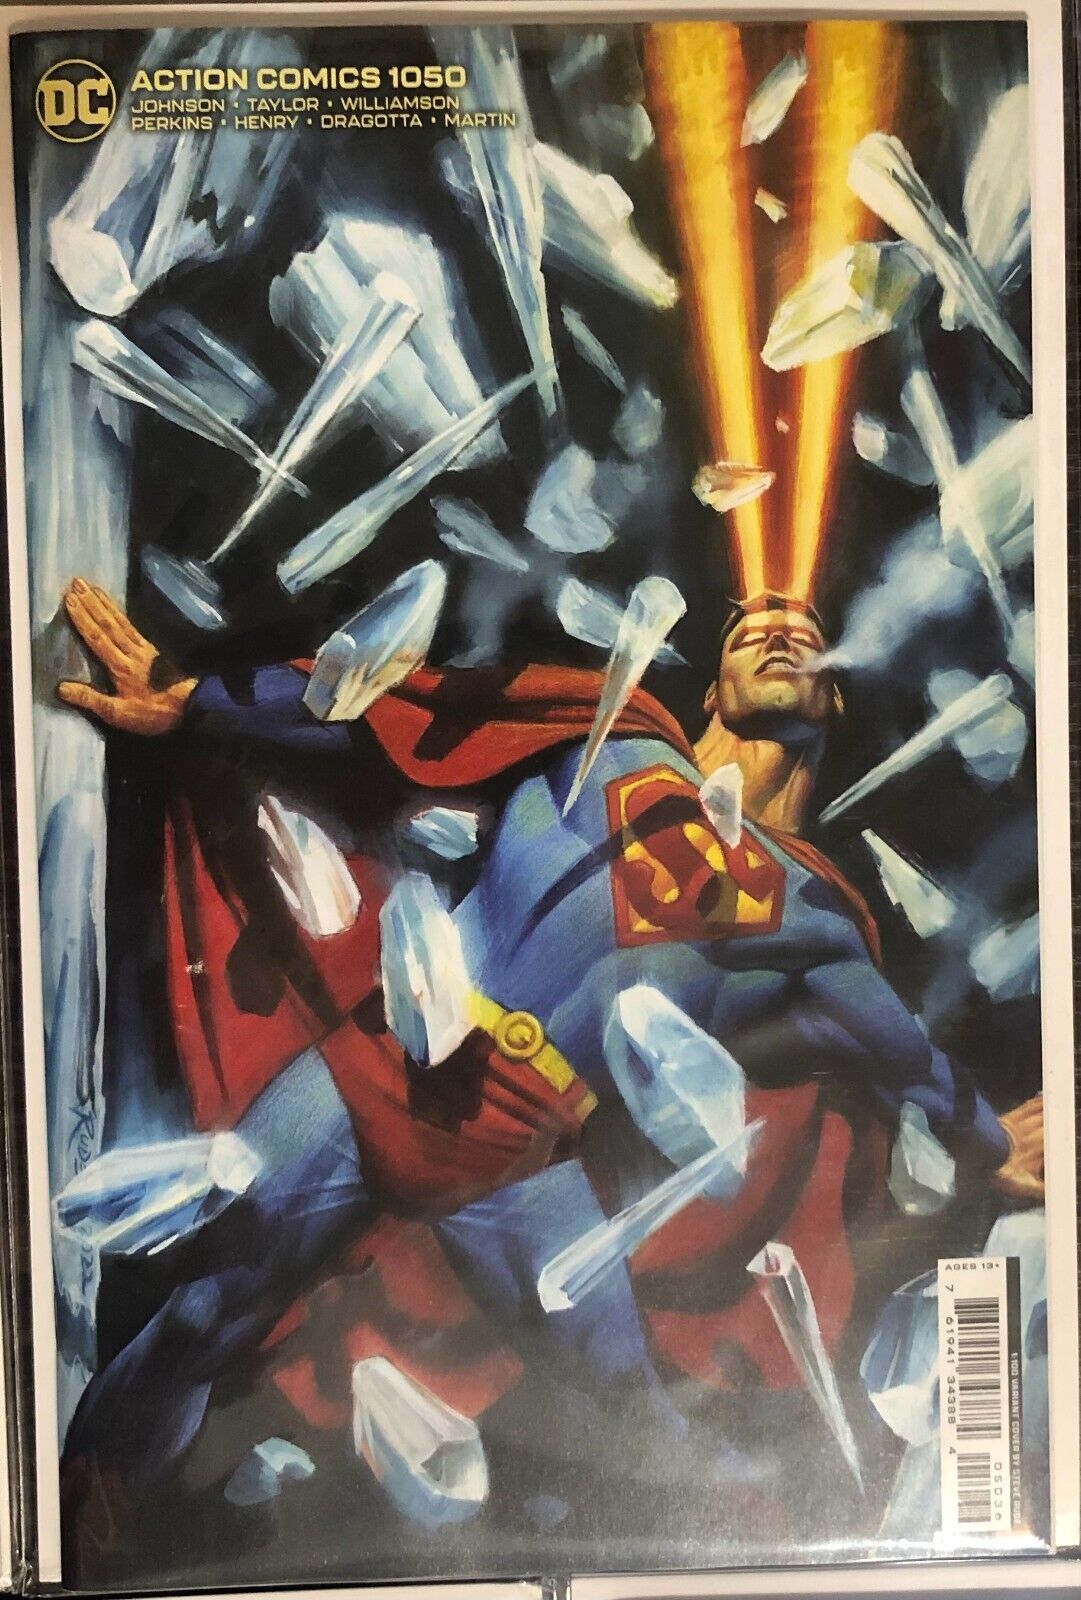 GOING OUT OF BUSINESS SALE SUPERMAN ACTION COMICS #1050 RATIO 1:100 NM or better